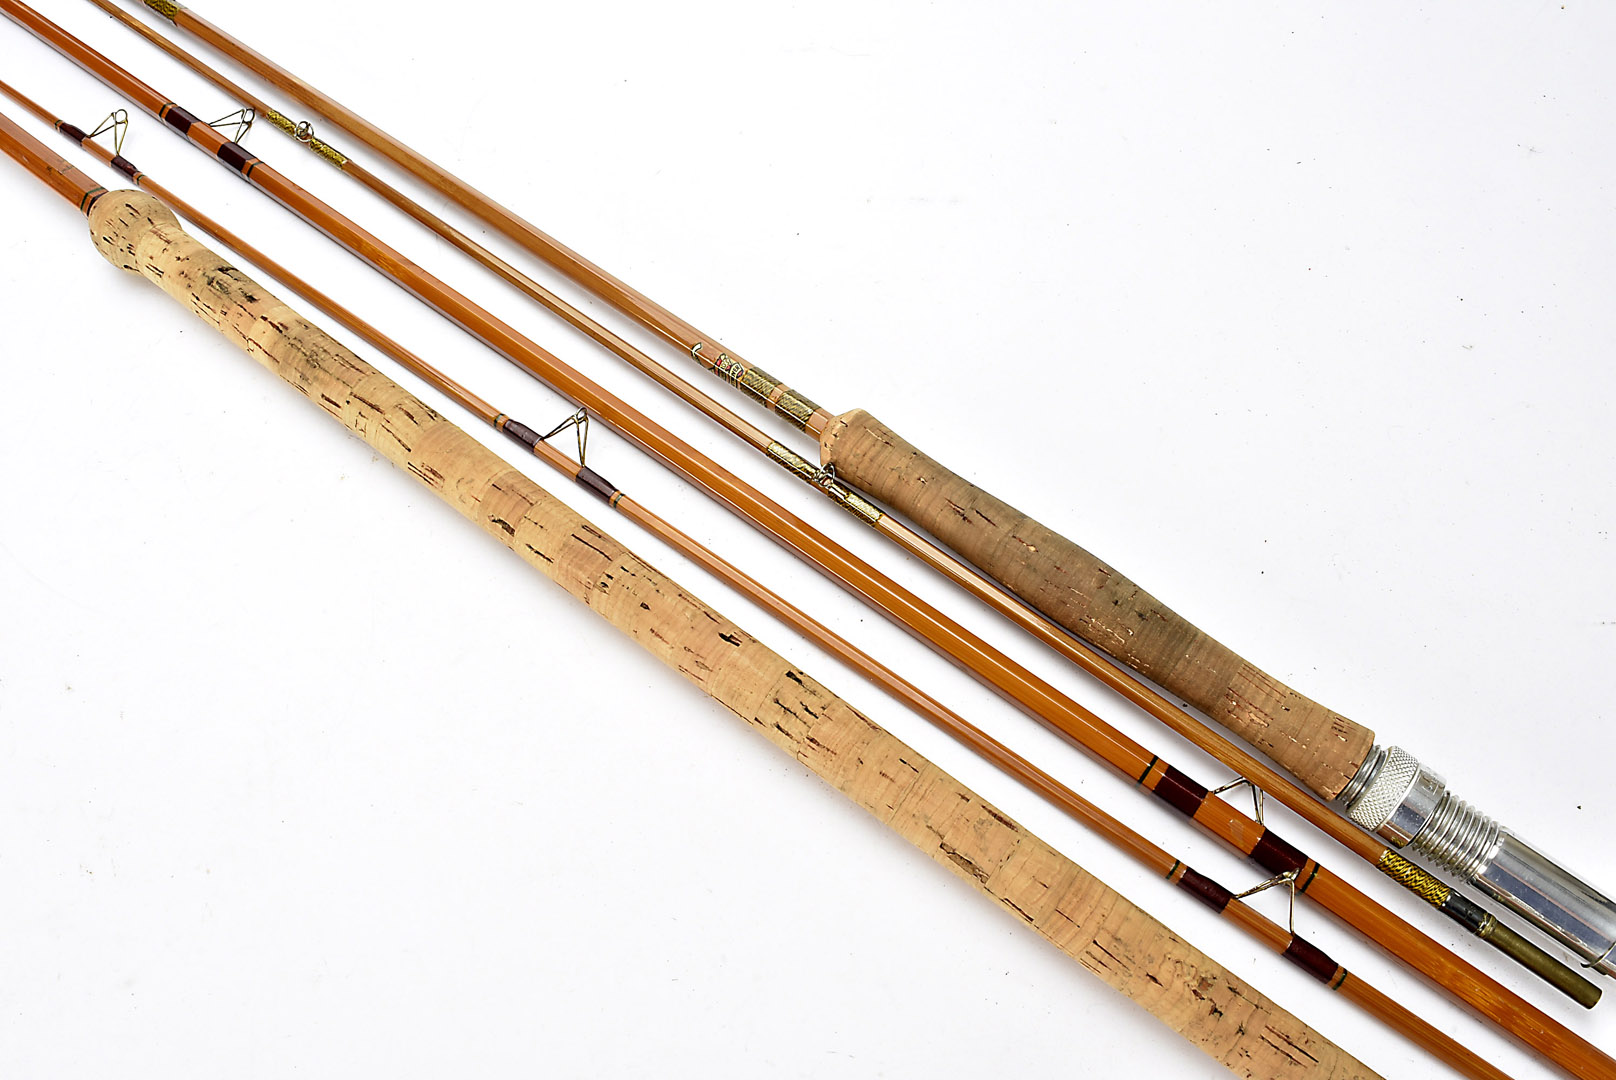 Angling Equipment, a good quality vintage Milwards" Troutrover" hexagonal cane trout fly rod, 8' 10" with bag, together with a B James & Son hexagonal cane course rod, 11' 6"